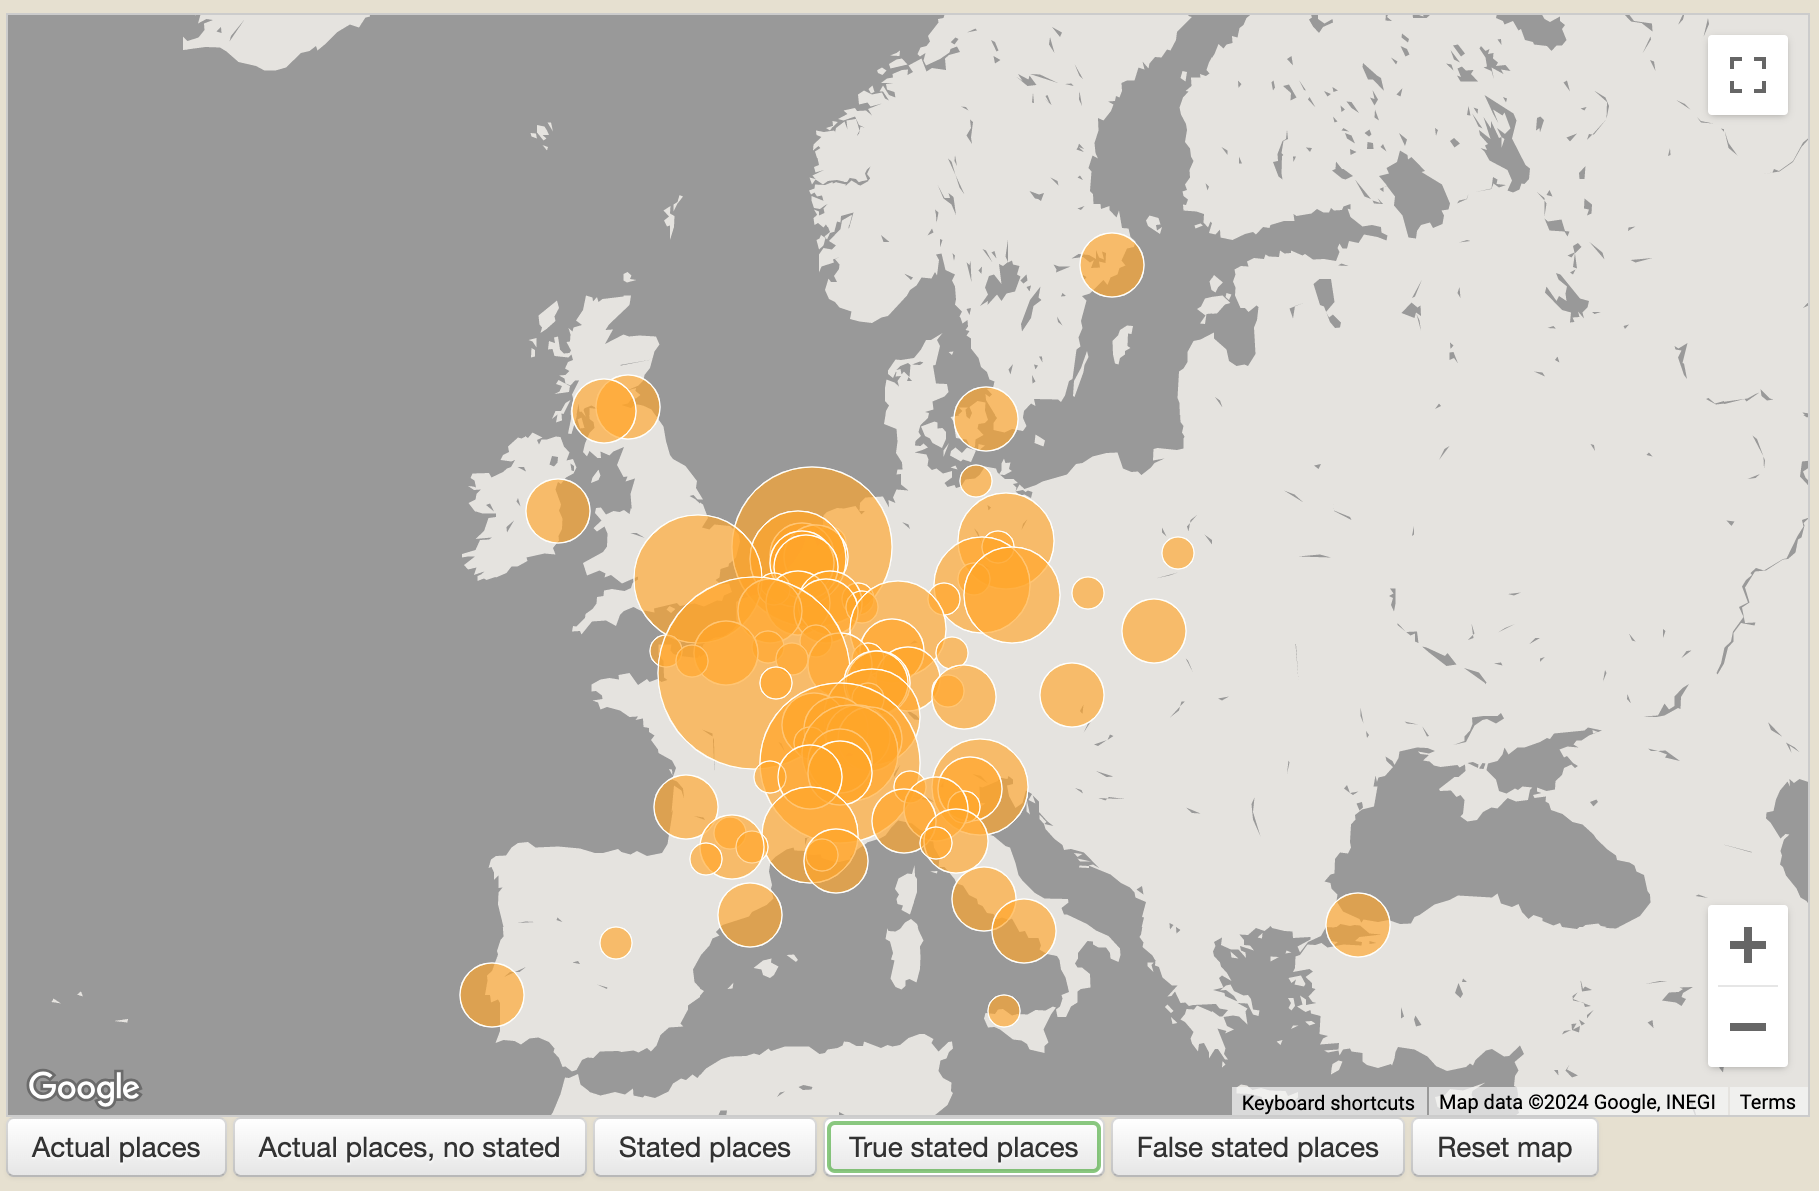 Map showing various sized orange circles over europe, indicating locations related to "actual places," "stated places," "true stated places," and "false stated places.